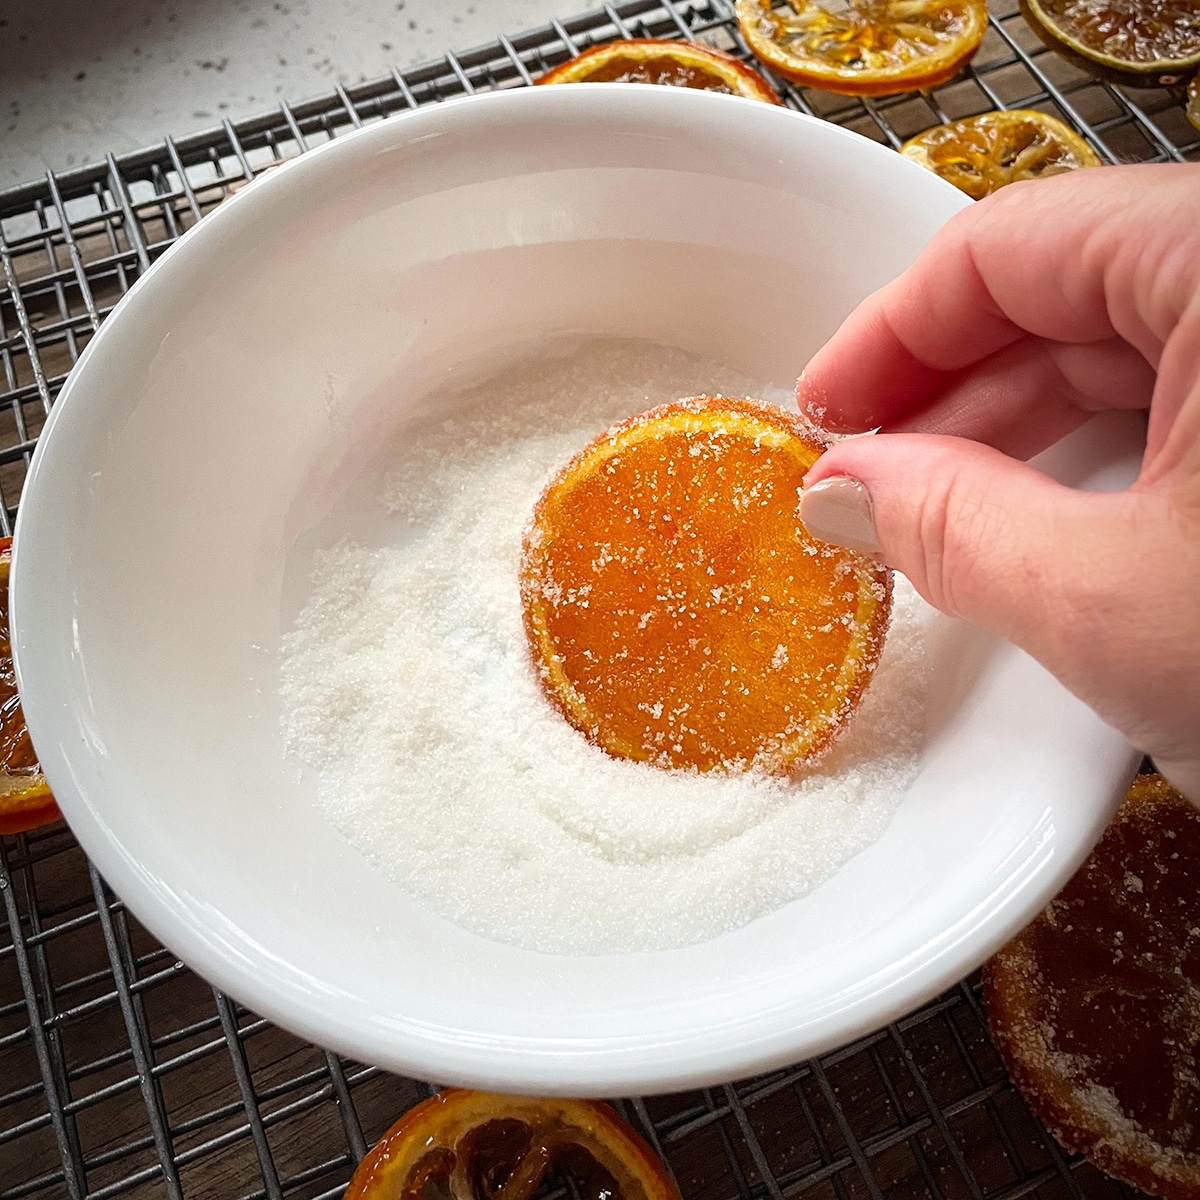 Dipping a candied orange slice in granulated sugar.